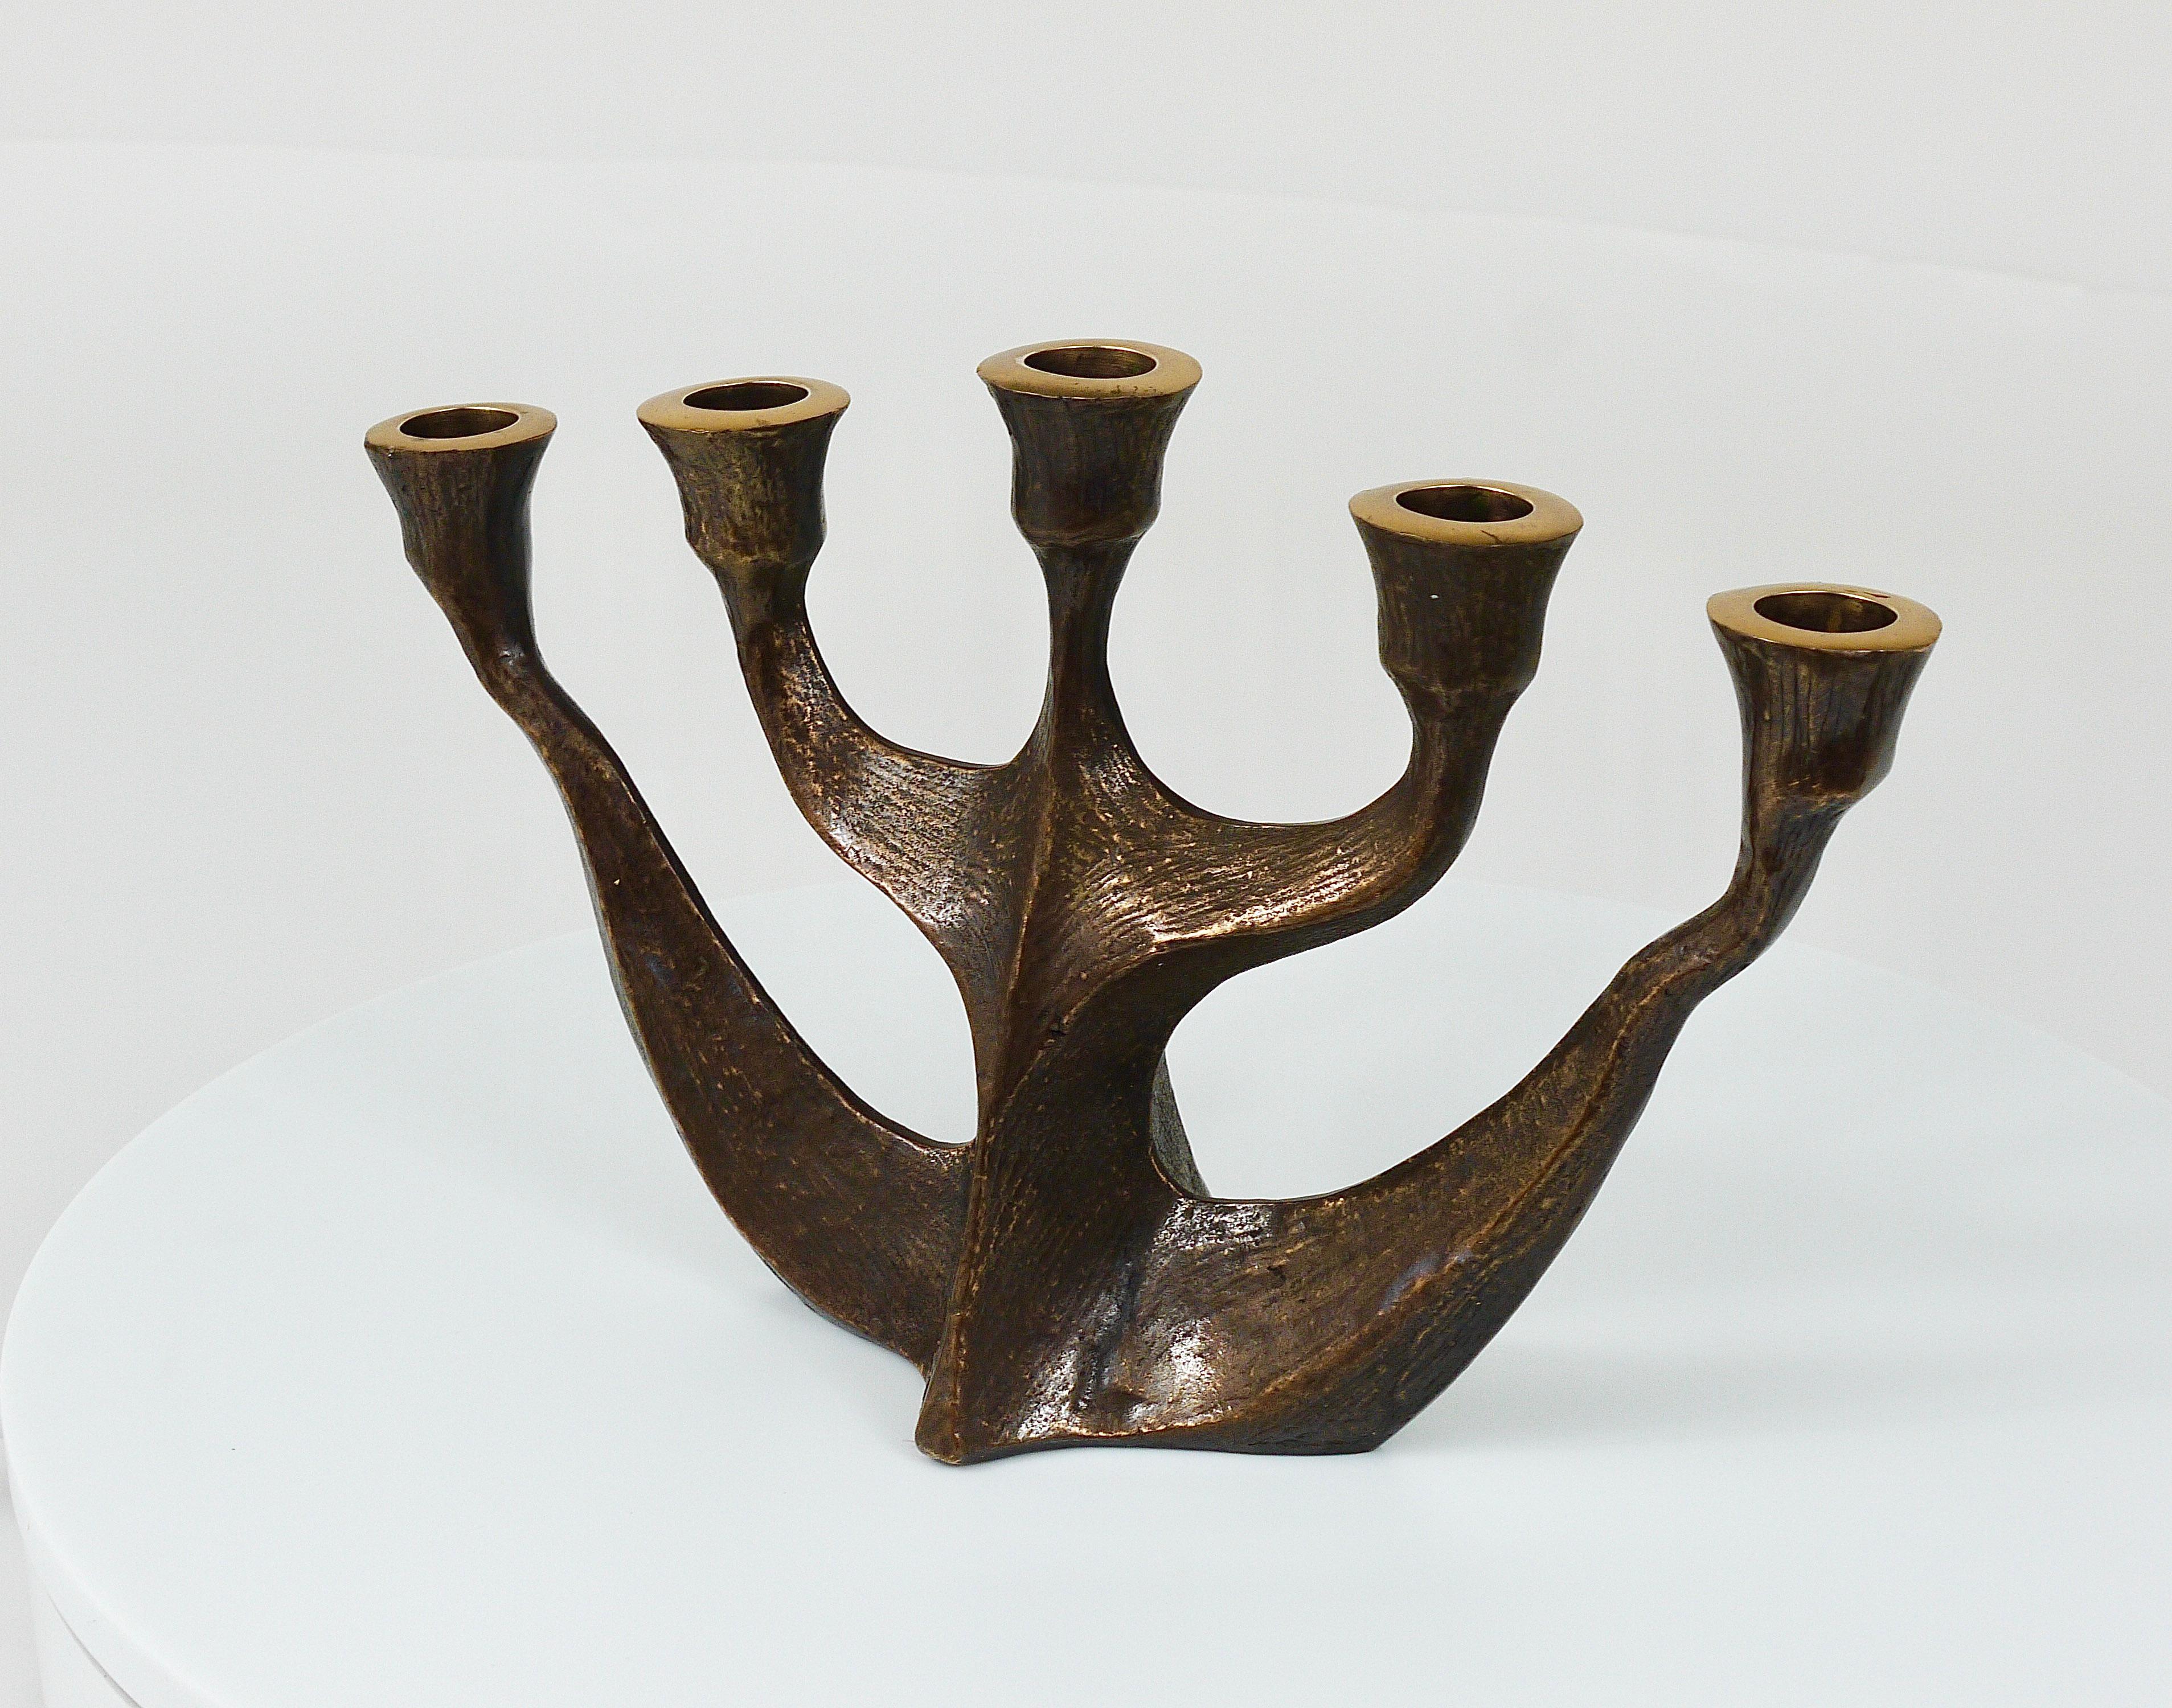 Up to Two Midcentury Brutalist Bronze Candleholders by Michael Harjes, 1960s For Sale 5